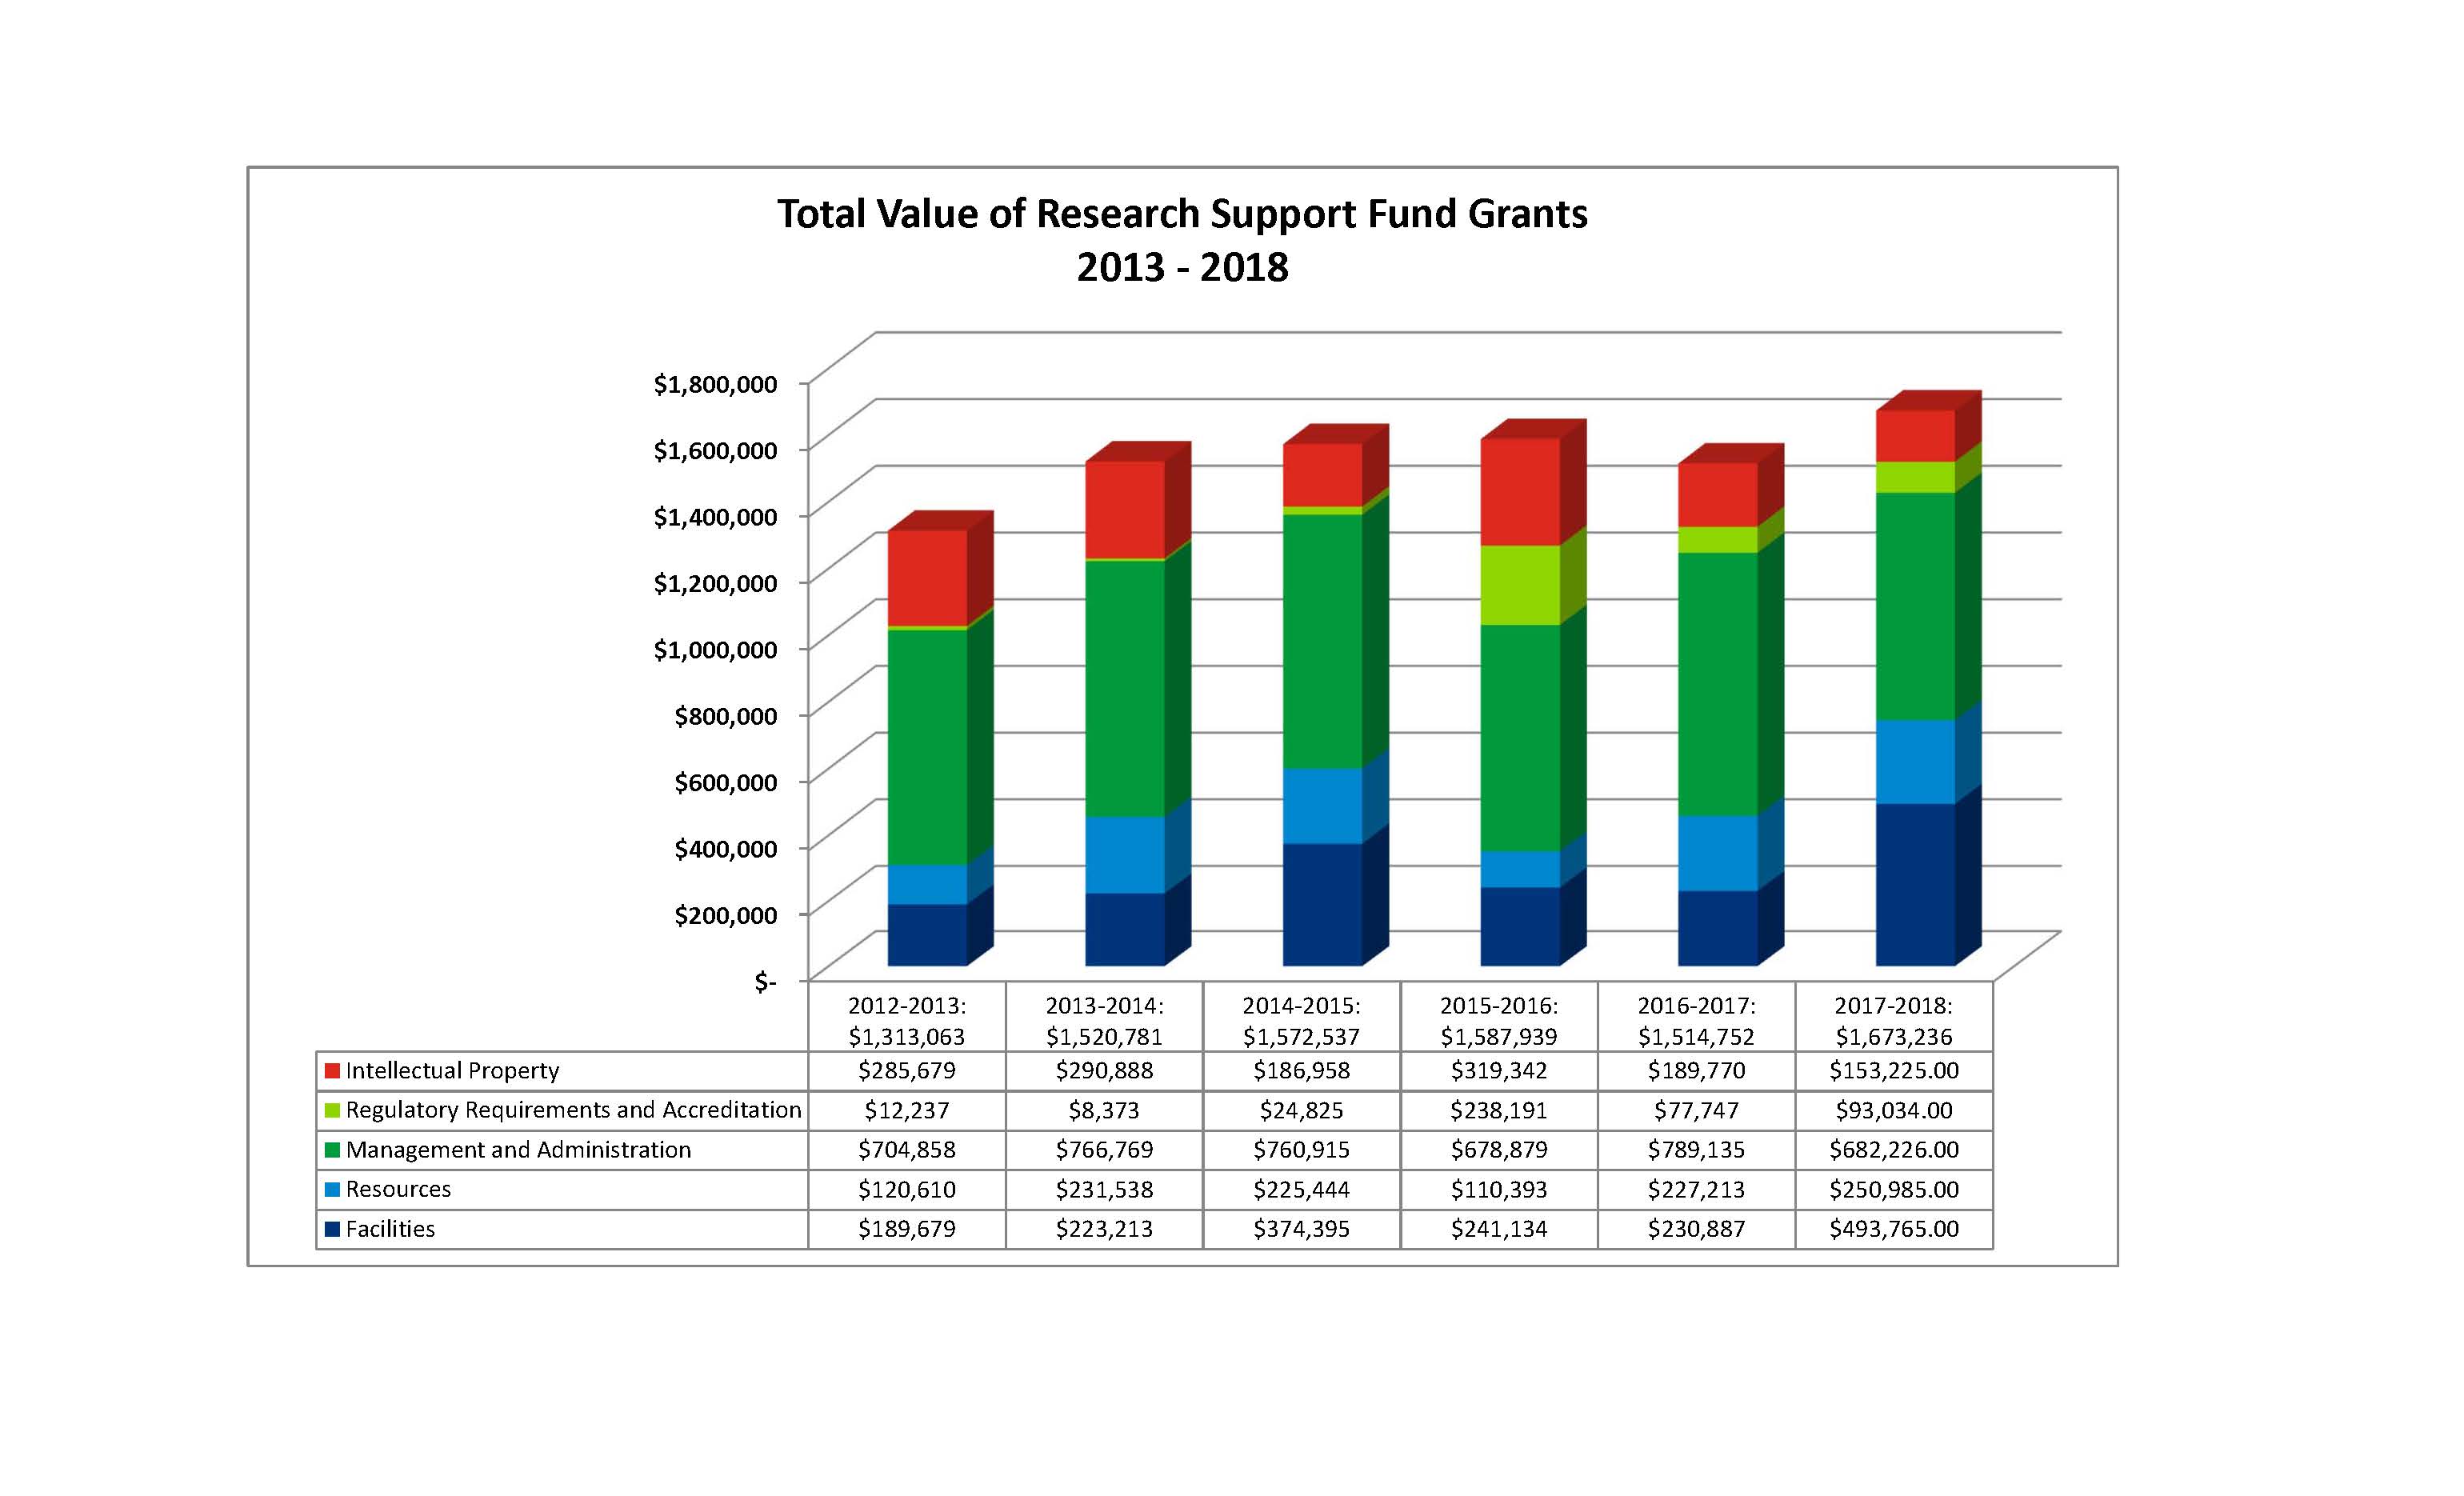 Total value of Research Support Fund Grant at Ontario Tech University 2013-2017